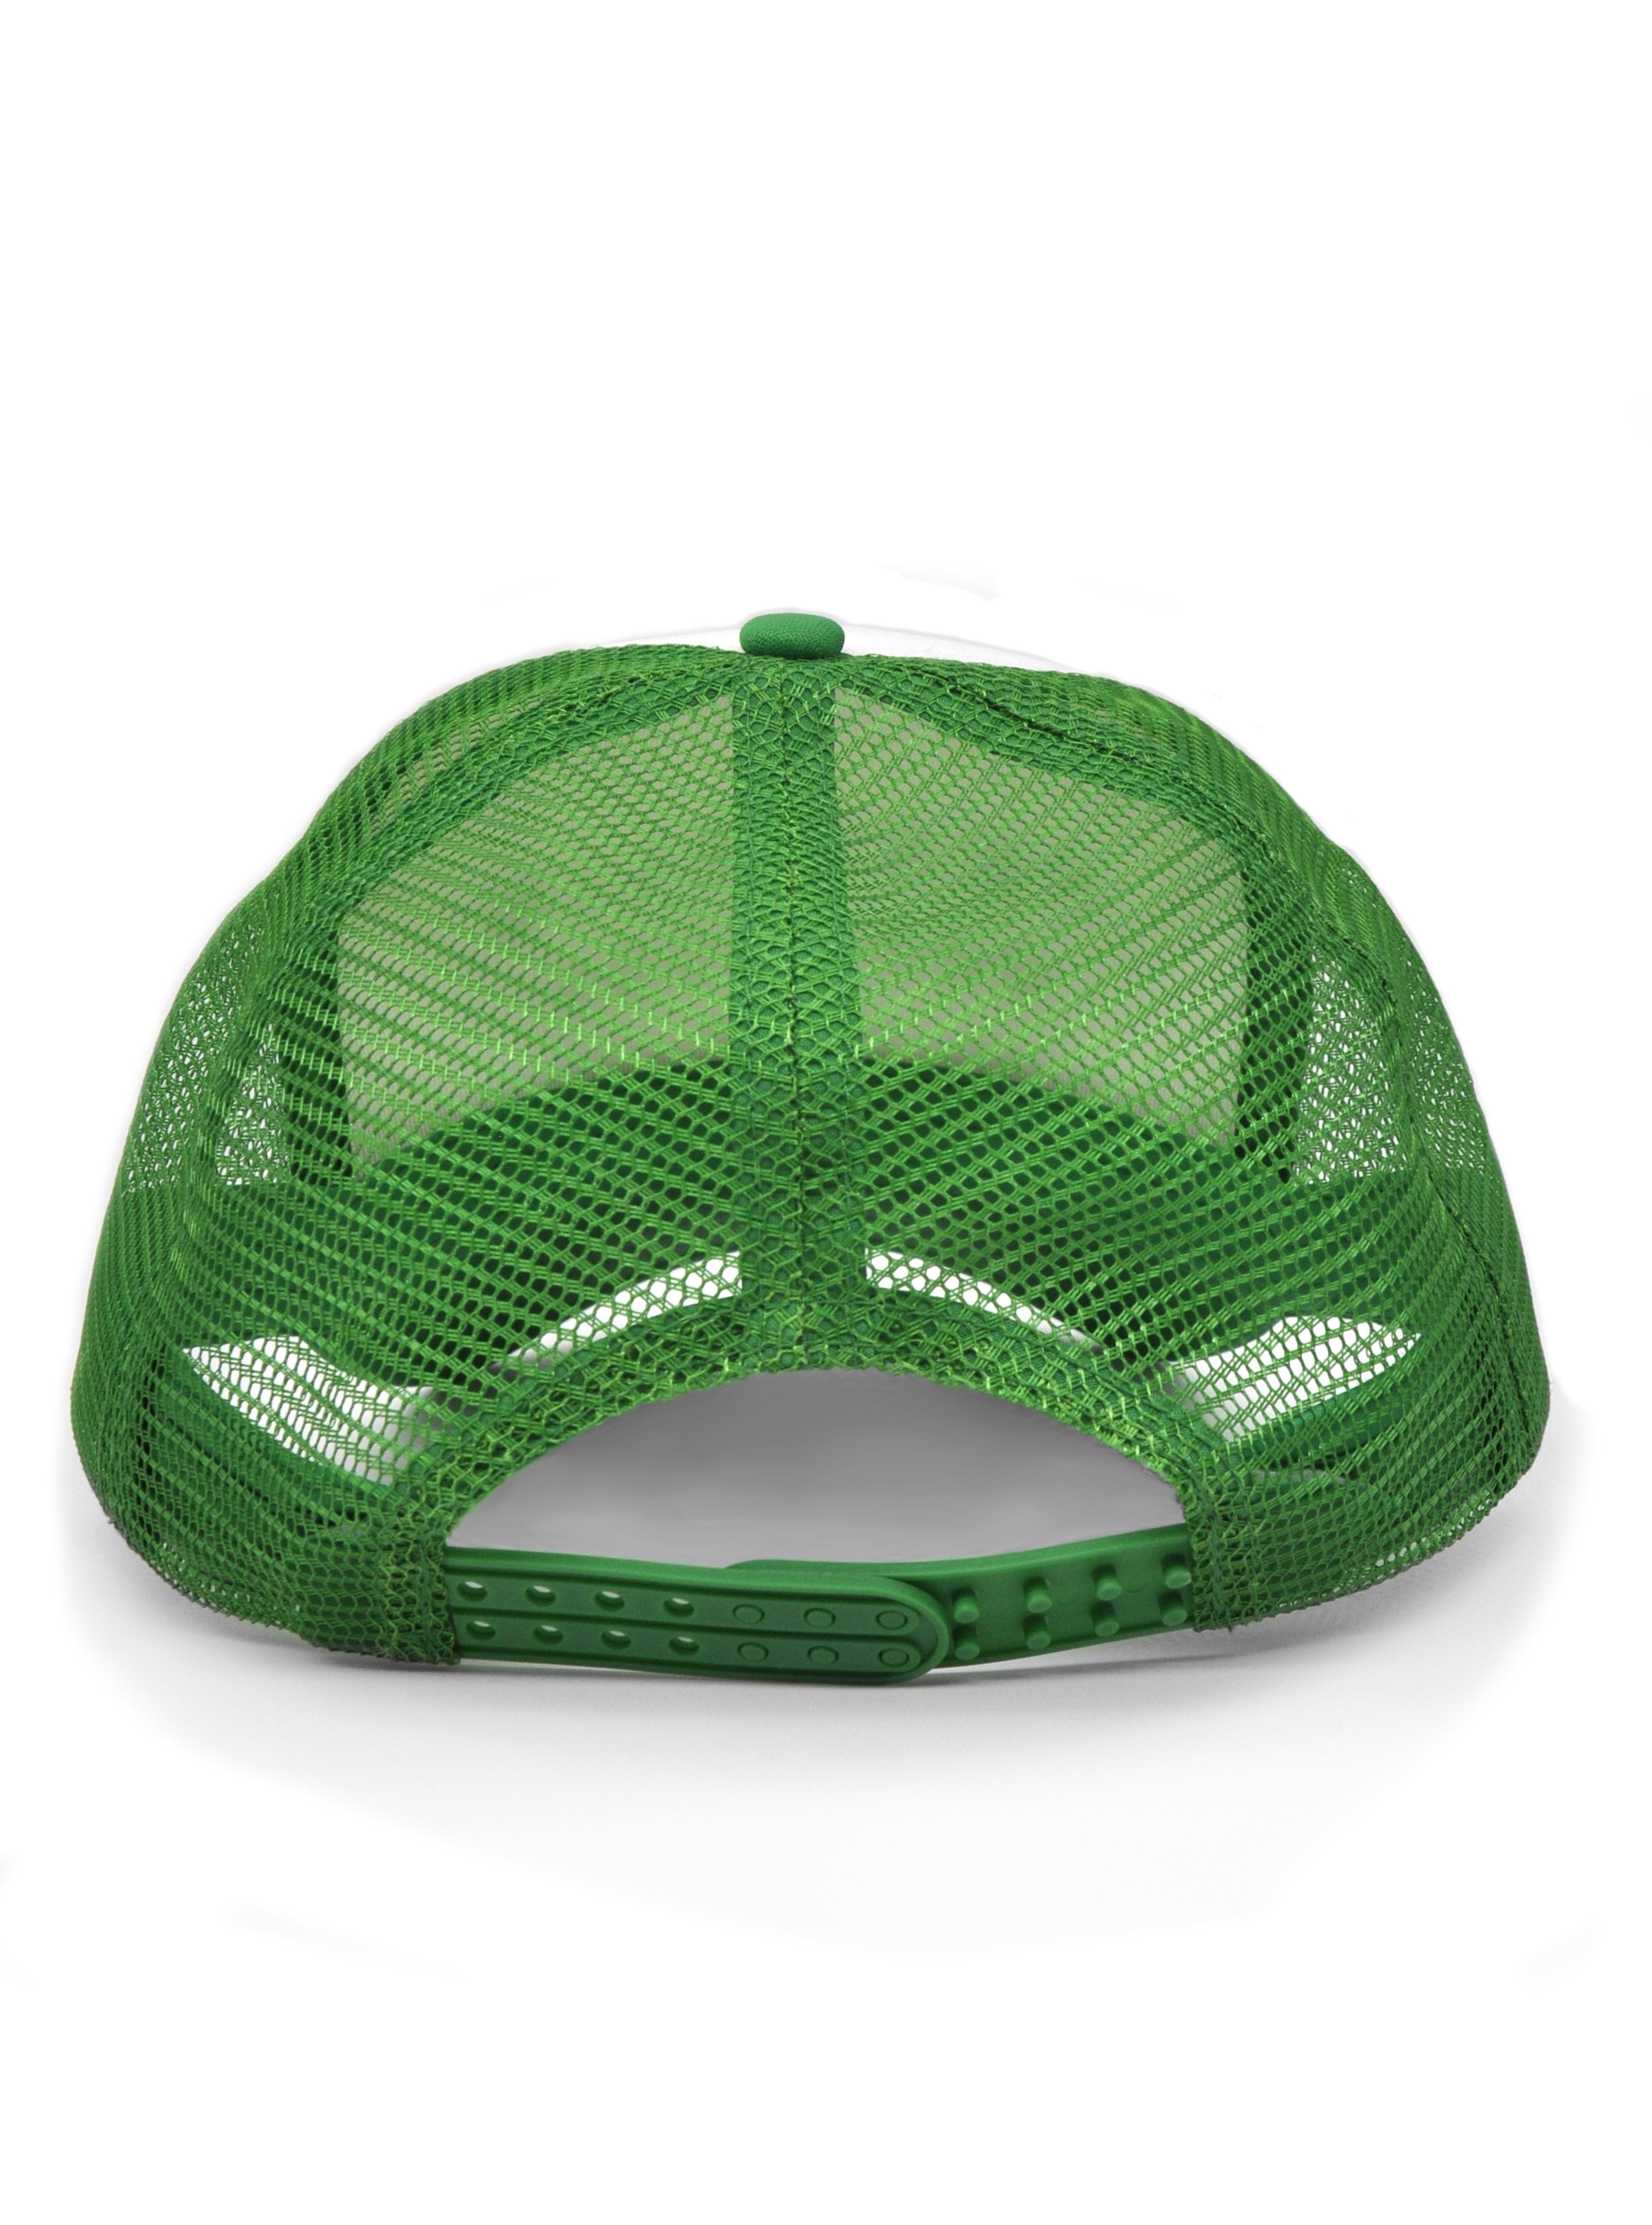 Back view of Franklin BBQ Pits Trucker Hat with green mesh backing and adjustable plastic snap back closure.